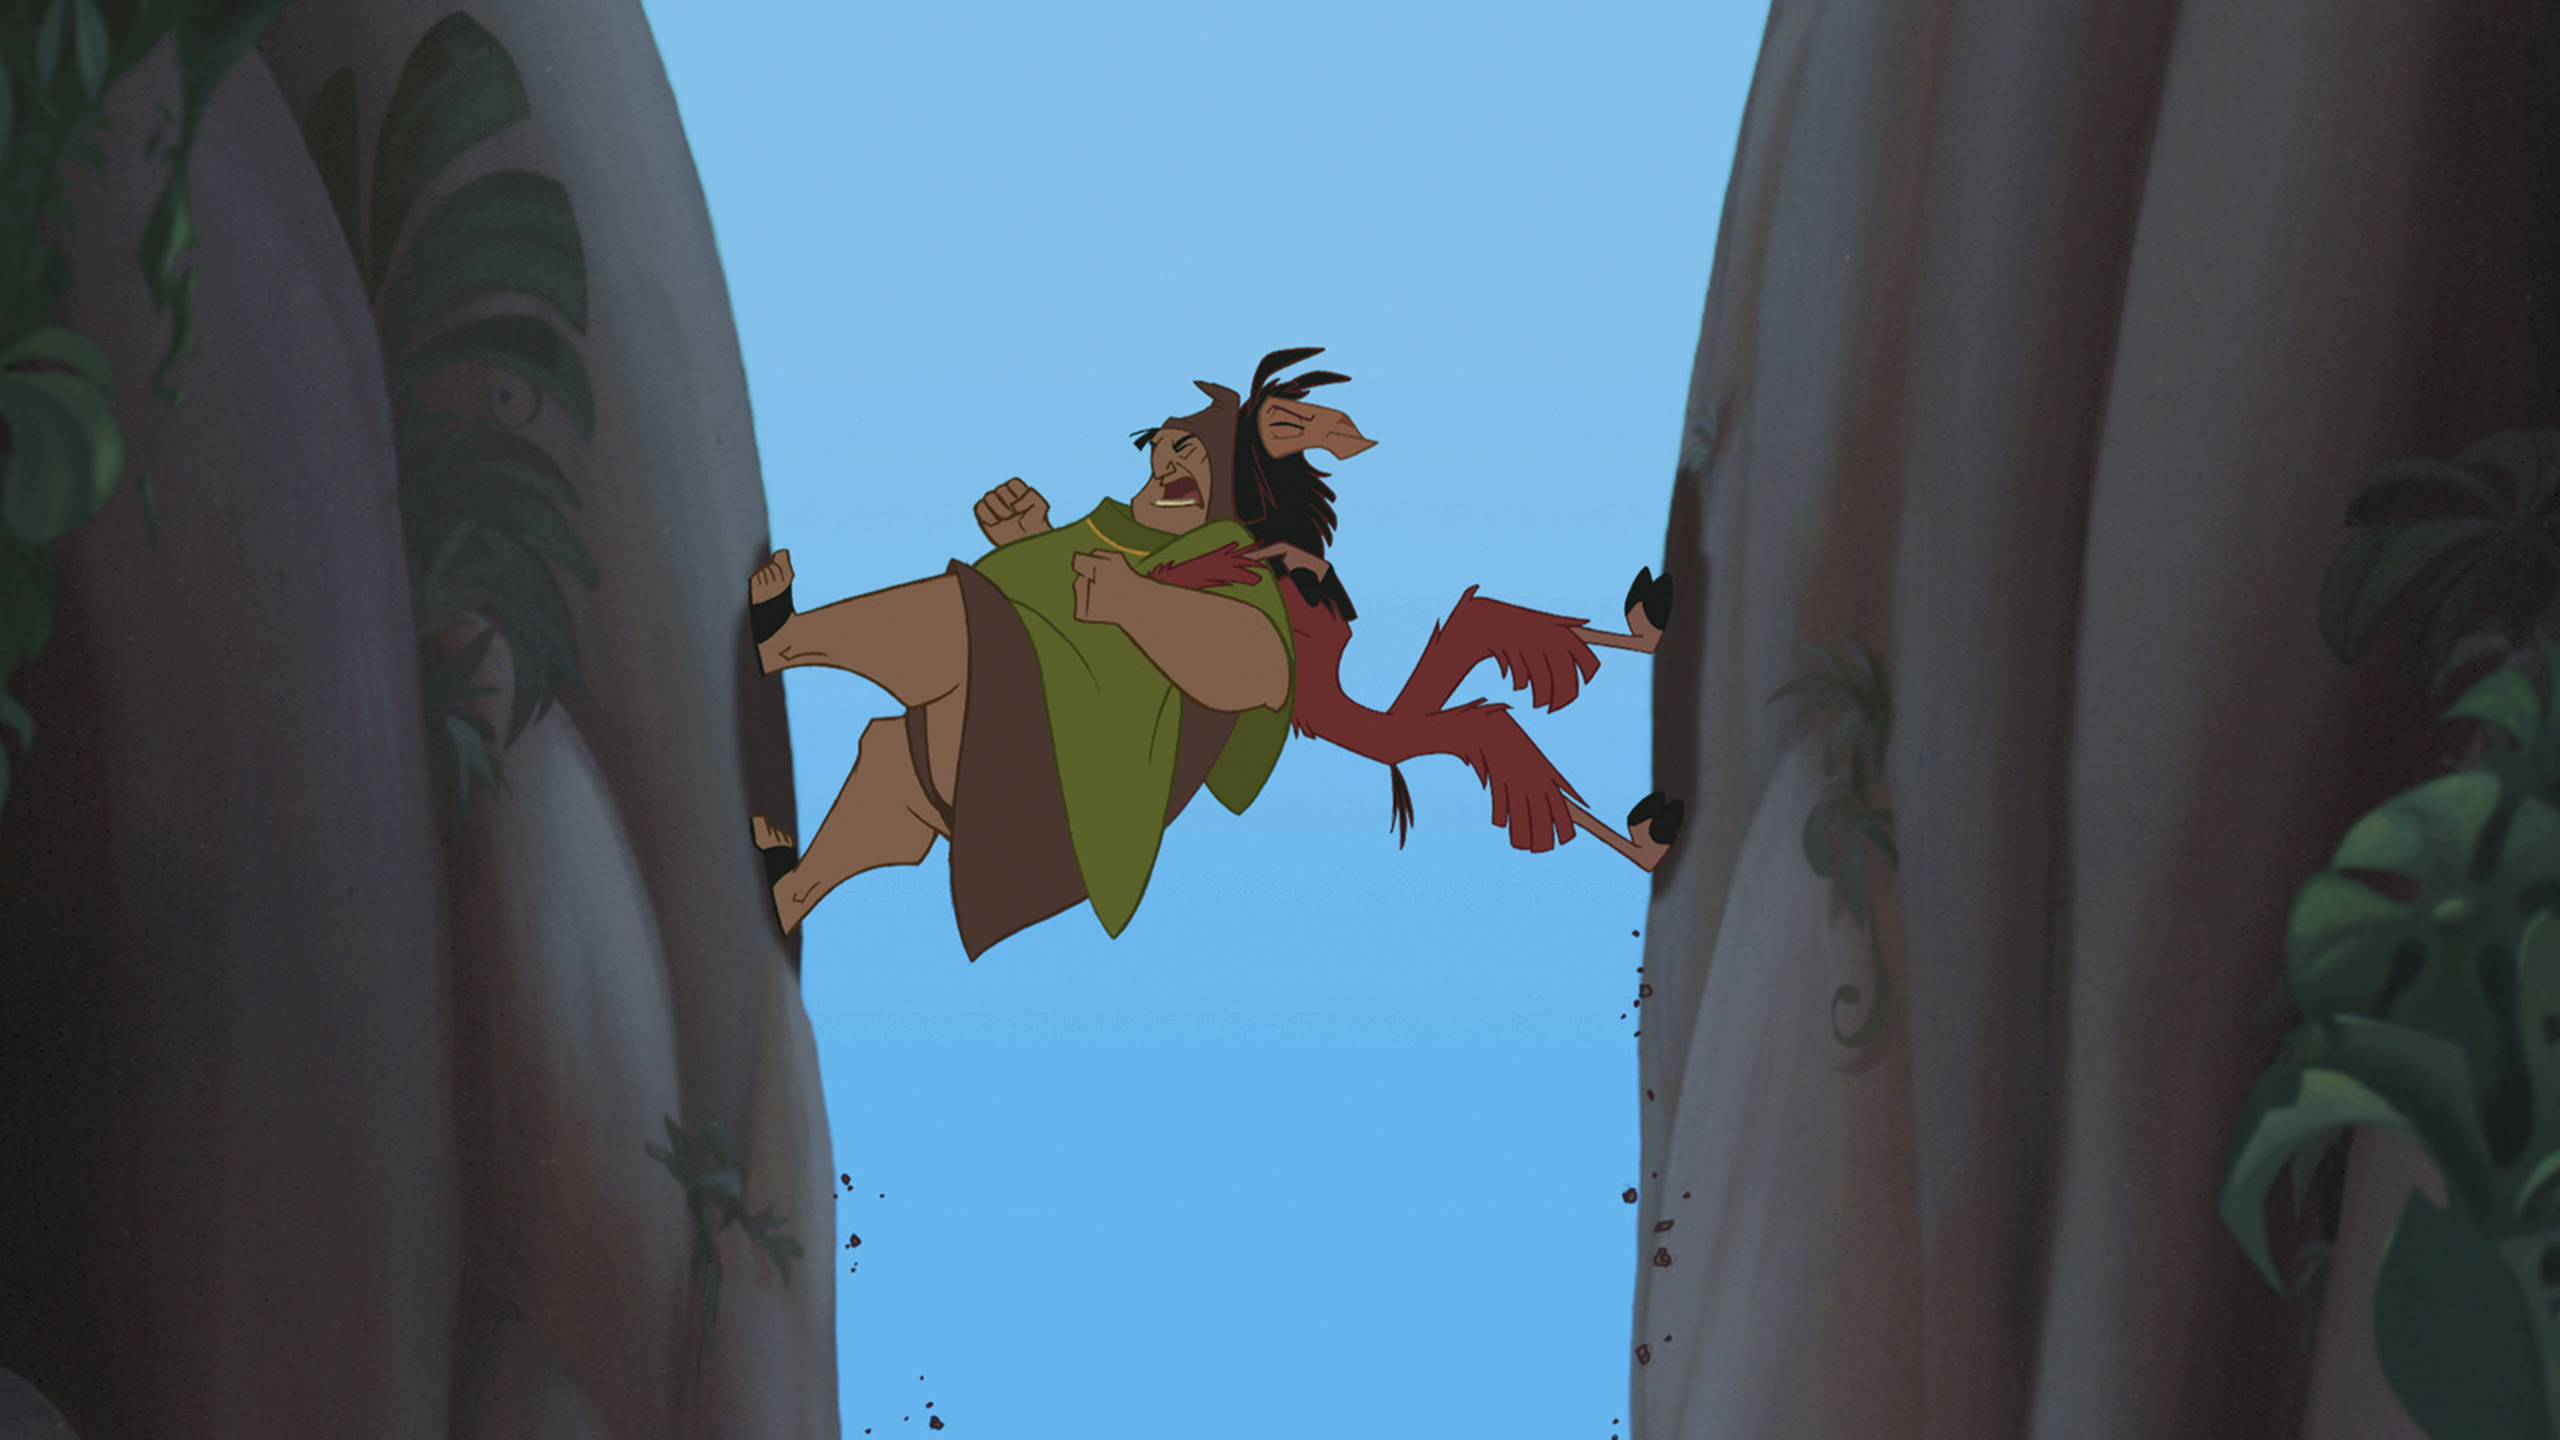 The Emperor's New Groove, Full movie online, Streaming options, Musical nostalgia, 2560x1440 HD Desktop